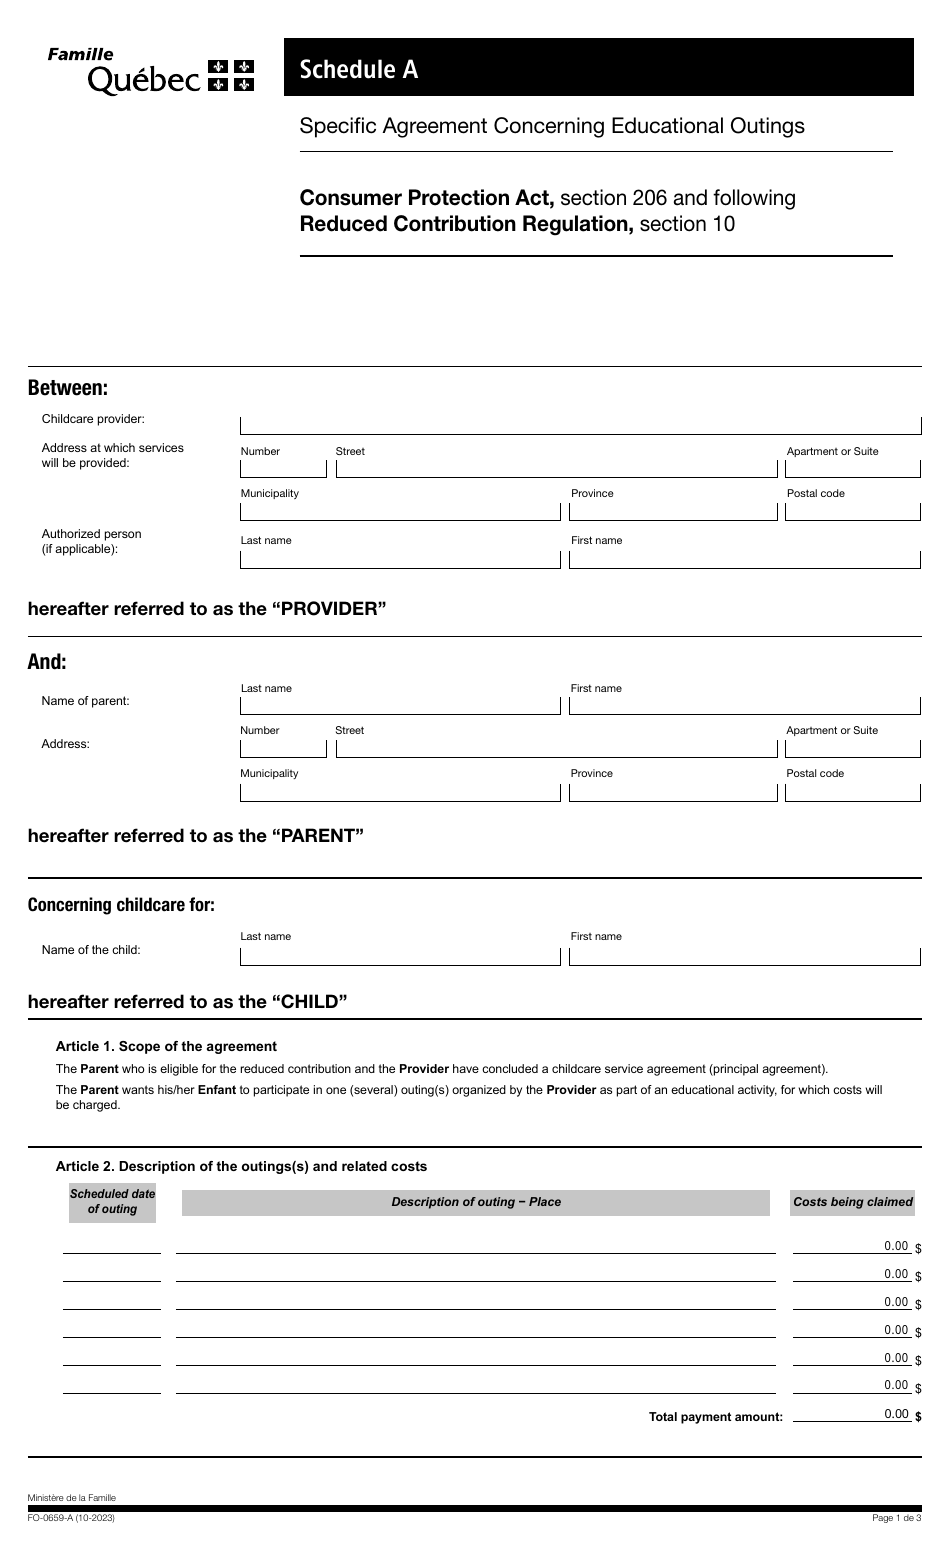 Form FO-0659-A Schedule A Specifc Agreement Concerning Educational Outings - Quebec, Canada, Page 1